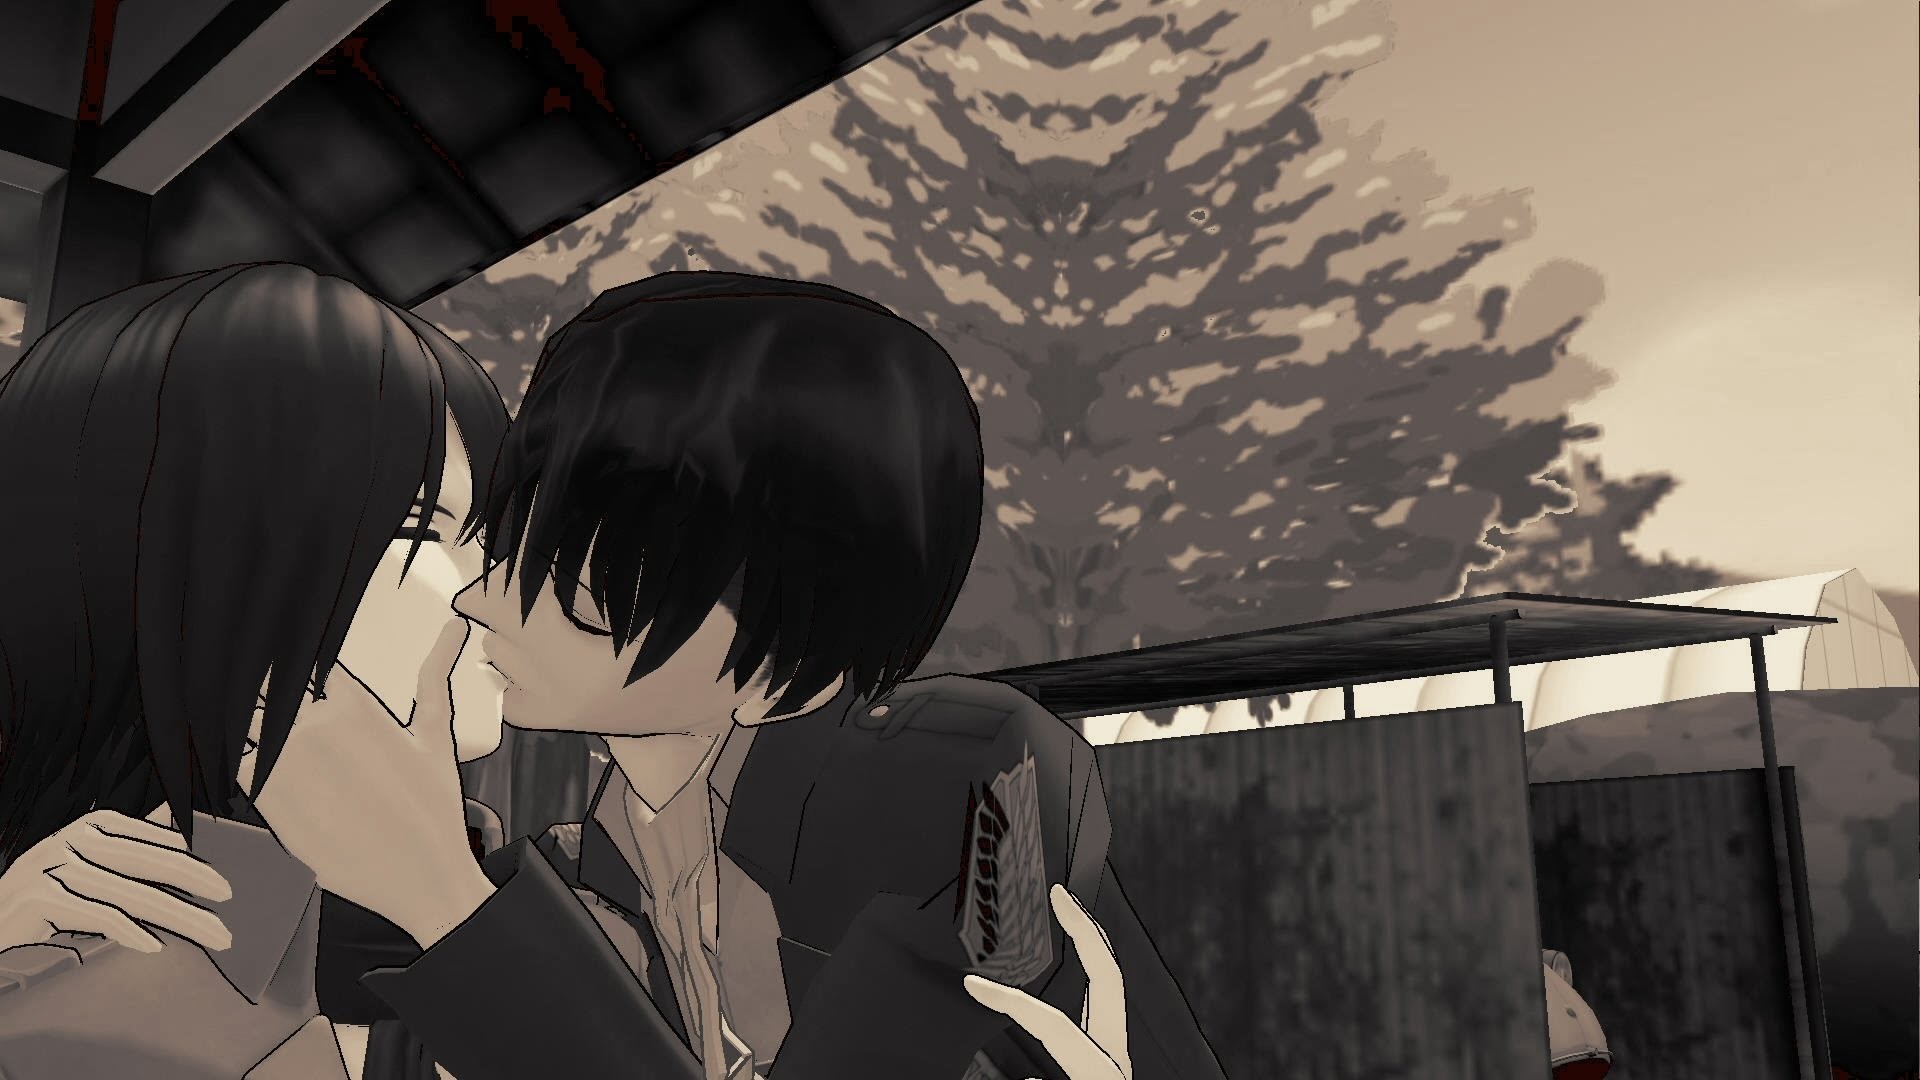 1920x1080 Attack on titan eren and mikasa kiss wallpapers